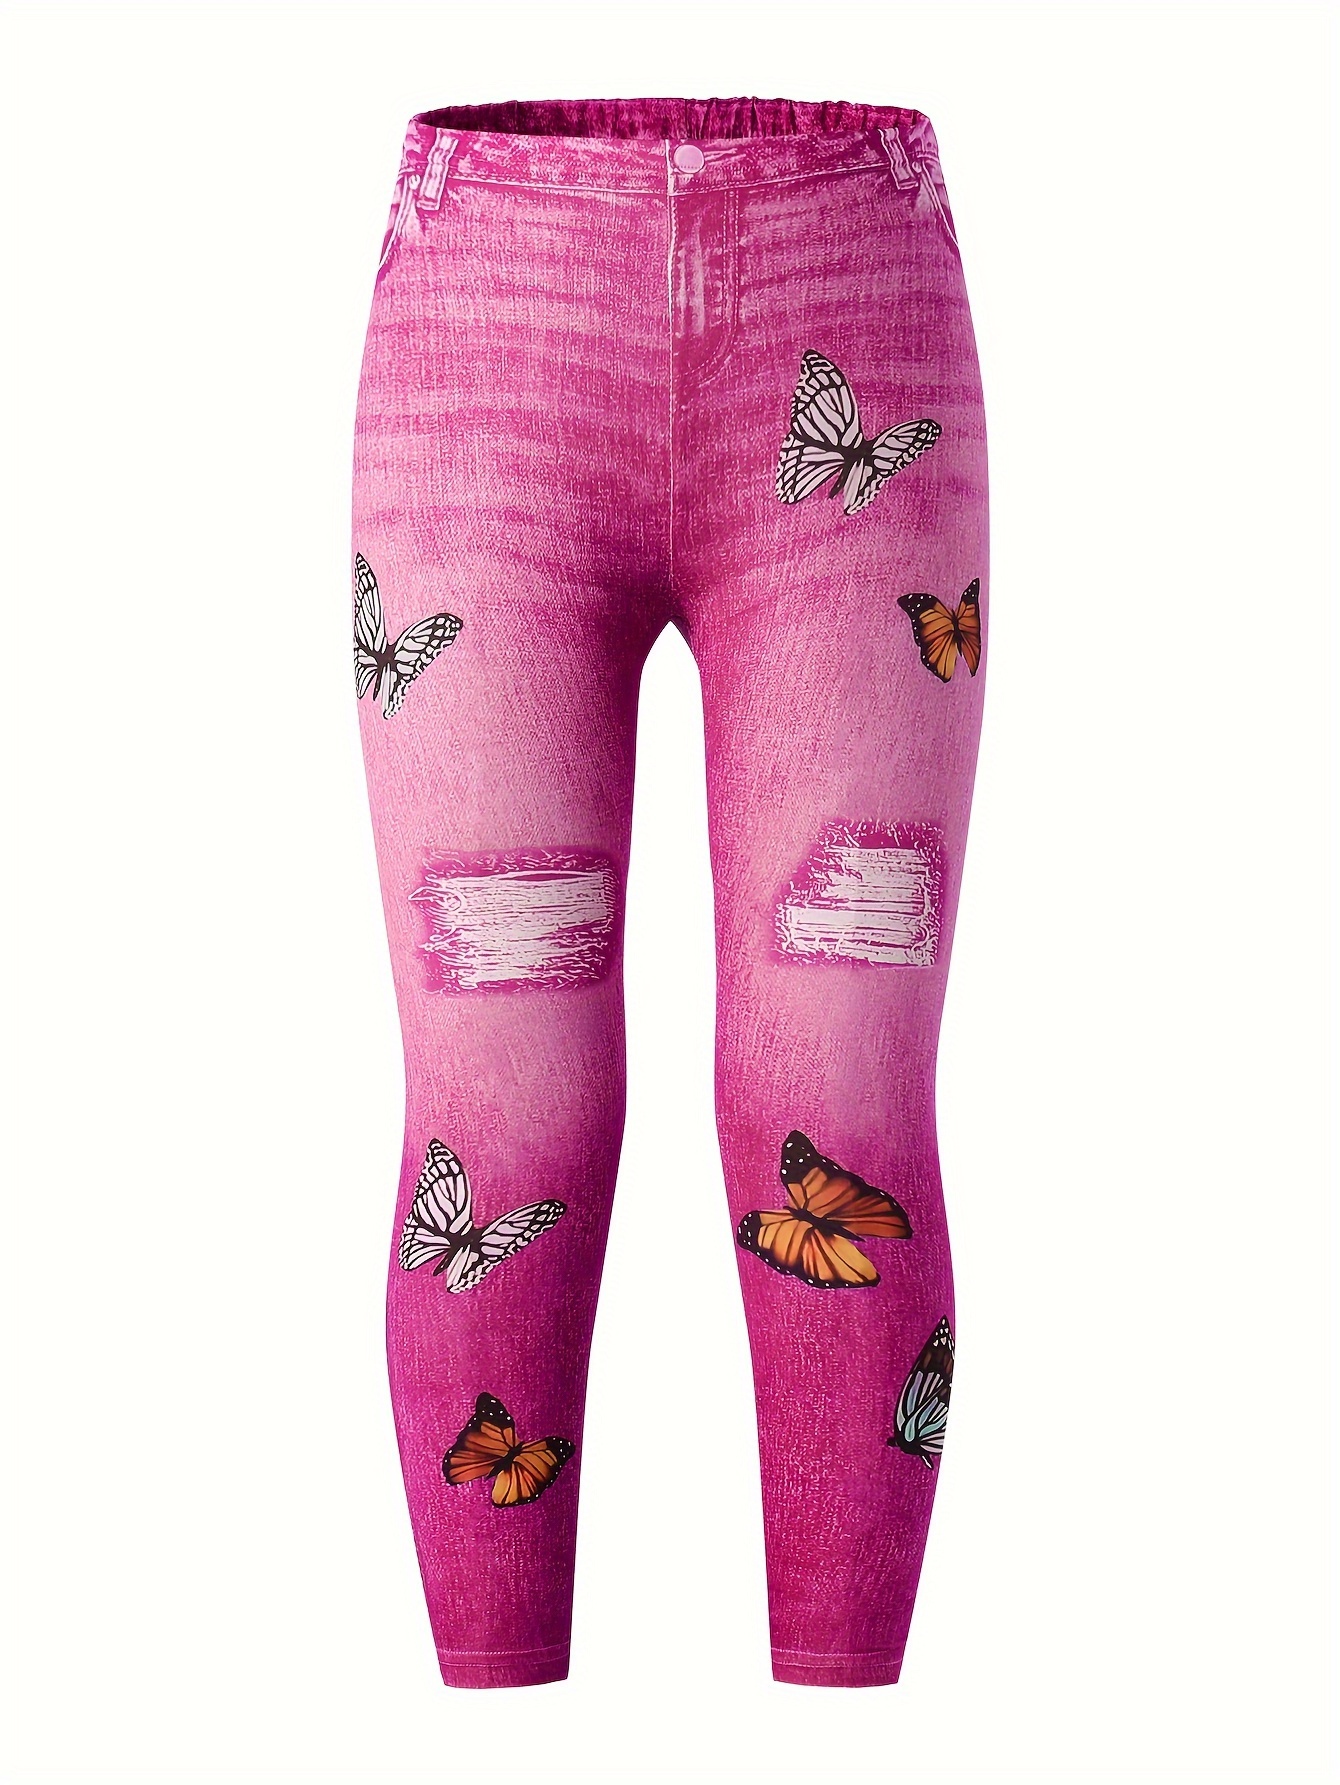 Girls Leggings | Pink Butterfly Leggings | Kids Yoga Pants | Footless  Tights | No-Roll Waistband